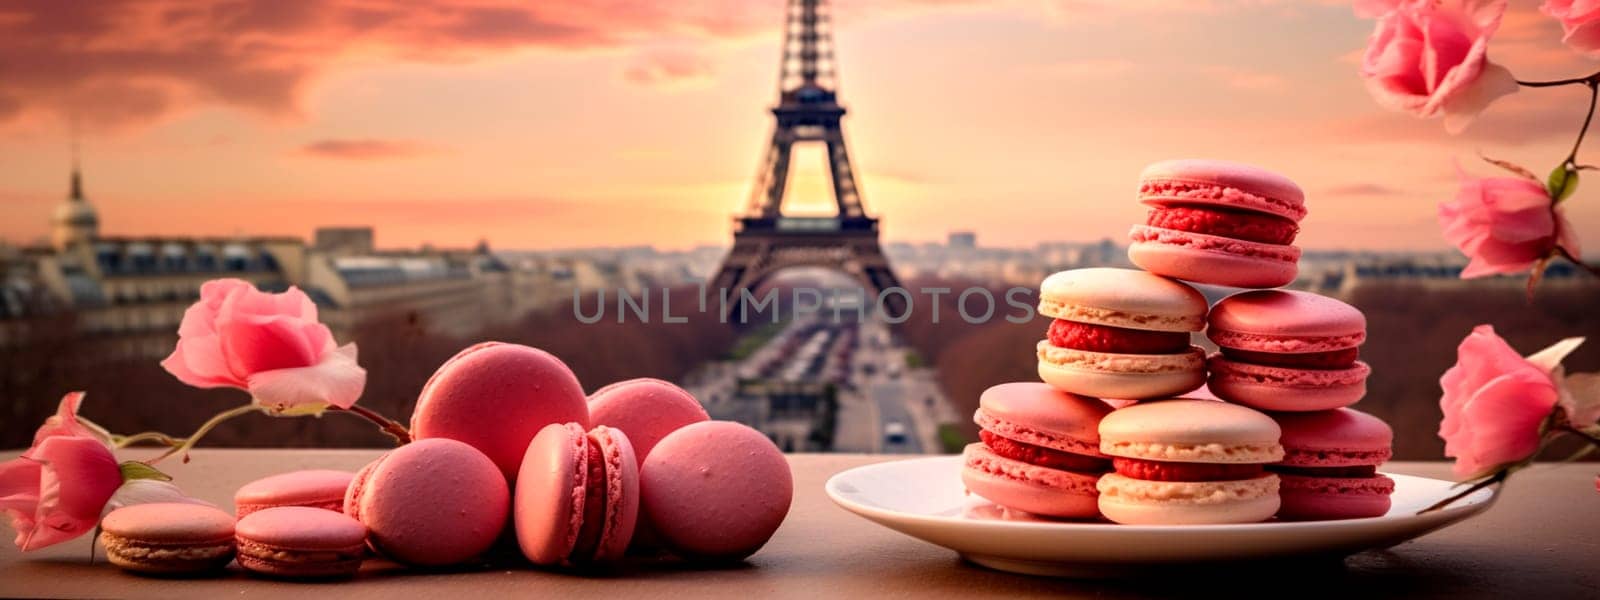 Macarons with the Eiffel Tower in the background. Selective focus. by yanadjana